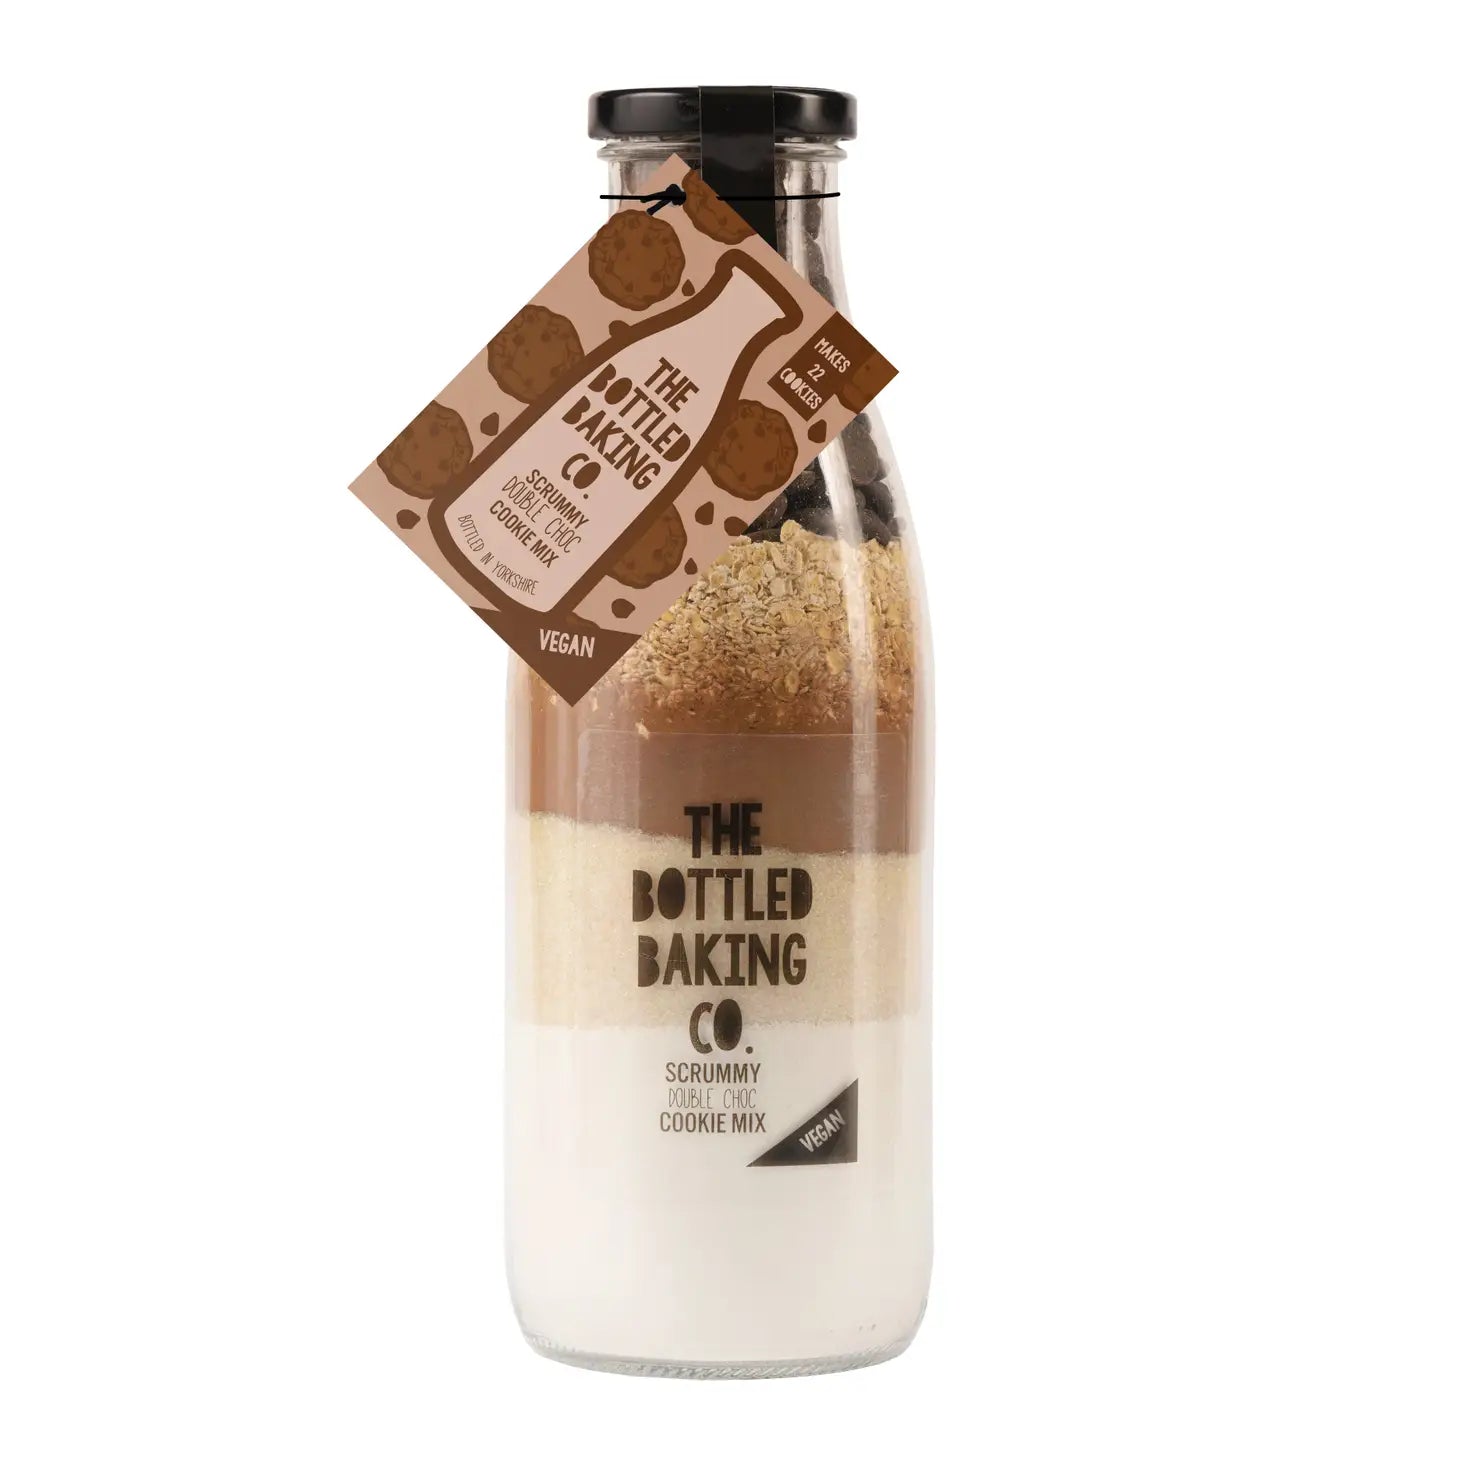 The Bottled Baking Co. - Double Choc Chip Vegan Cookie Baking Mix in a Bottle 750ml